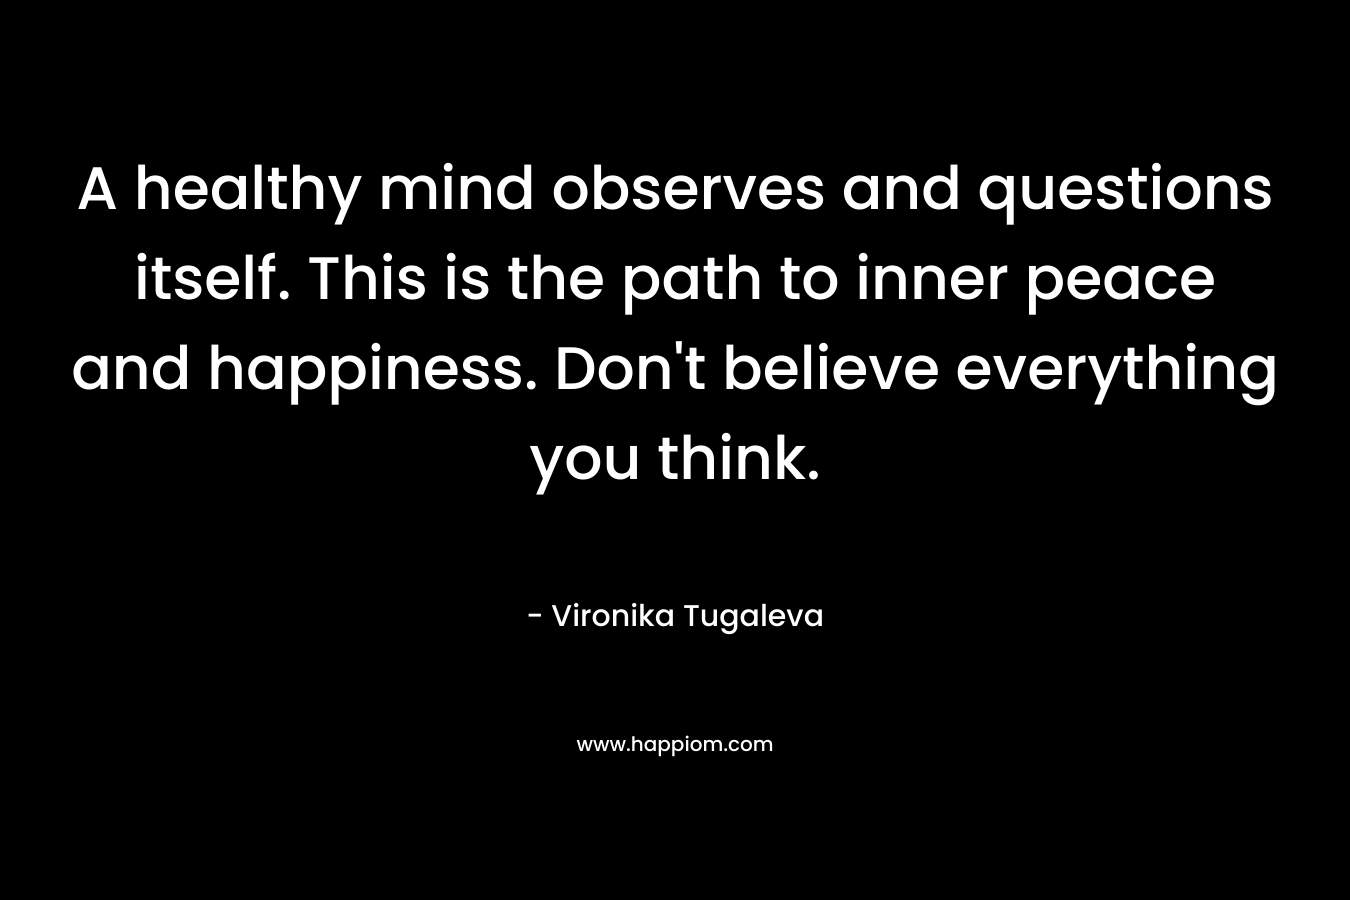 A healthy mind observes and questions itself. This is the path to inner peace and happiness. Don't believe everything you think.